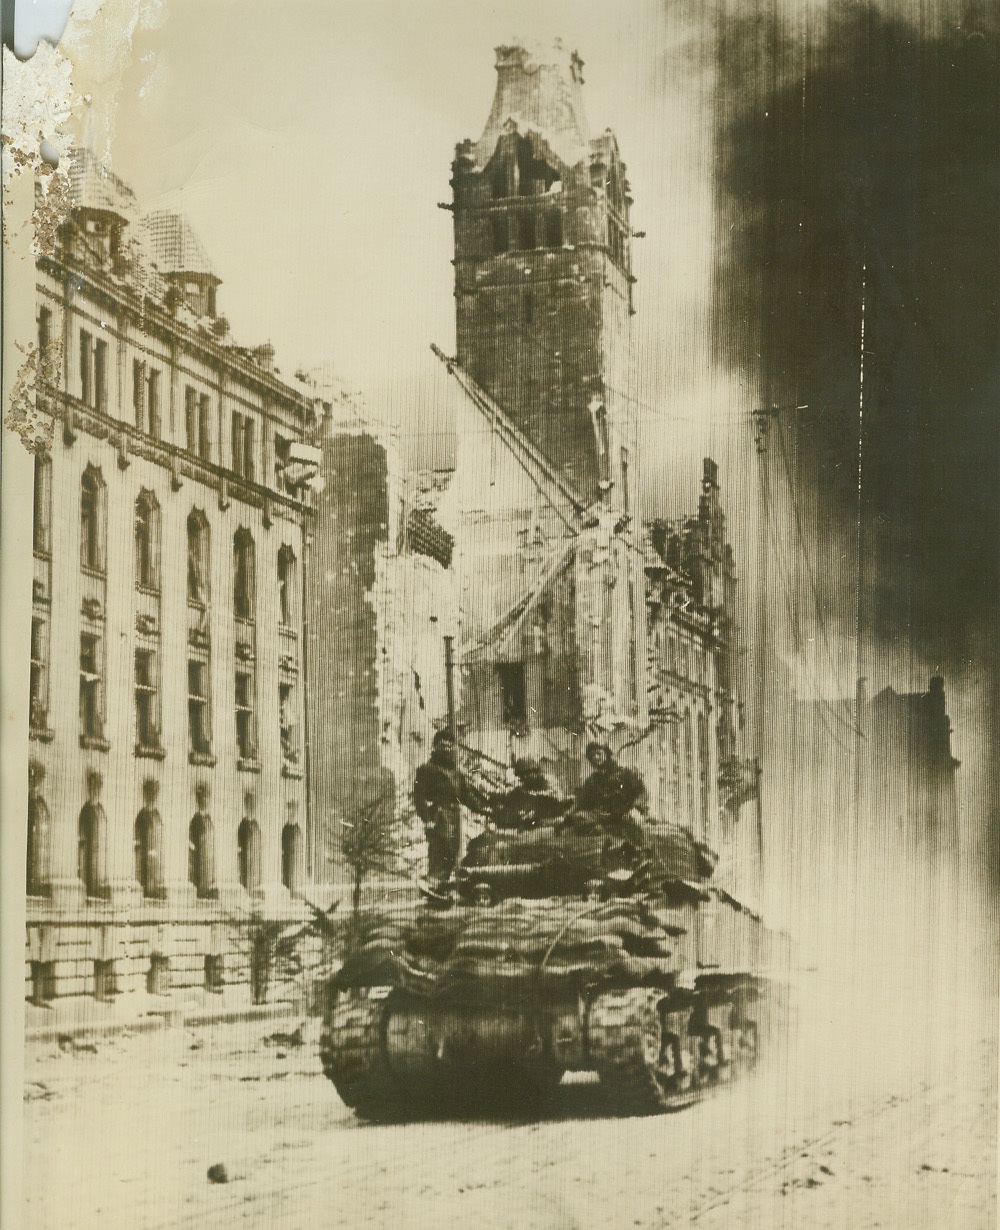 Yanks in Magdeburg, 4/18/1945. GERMANY – A tank of the 2nd Armored (Hell on Wheels) Division of the U.S. 9th Army, rumbles through a street in Magdeburg, against a backdrop of smoke and flames from still burning buildings. Ruins of the buildings show effects of the terrific battle of the city. Credit: (U.S. Signal Corps Radiophoto from ACME);